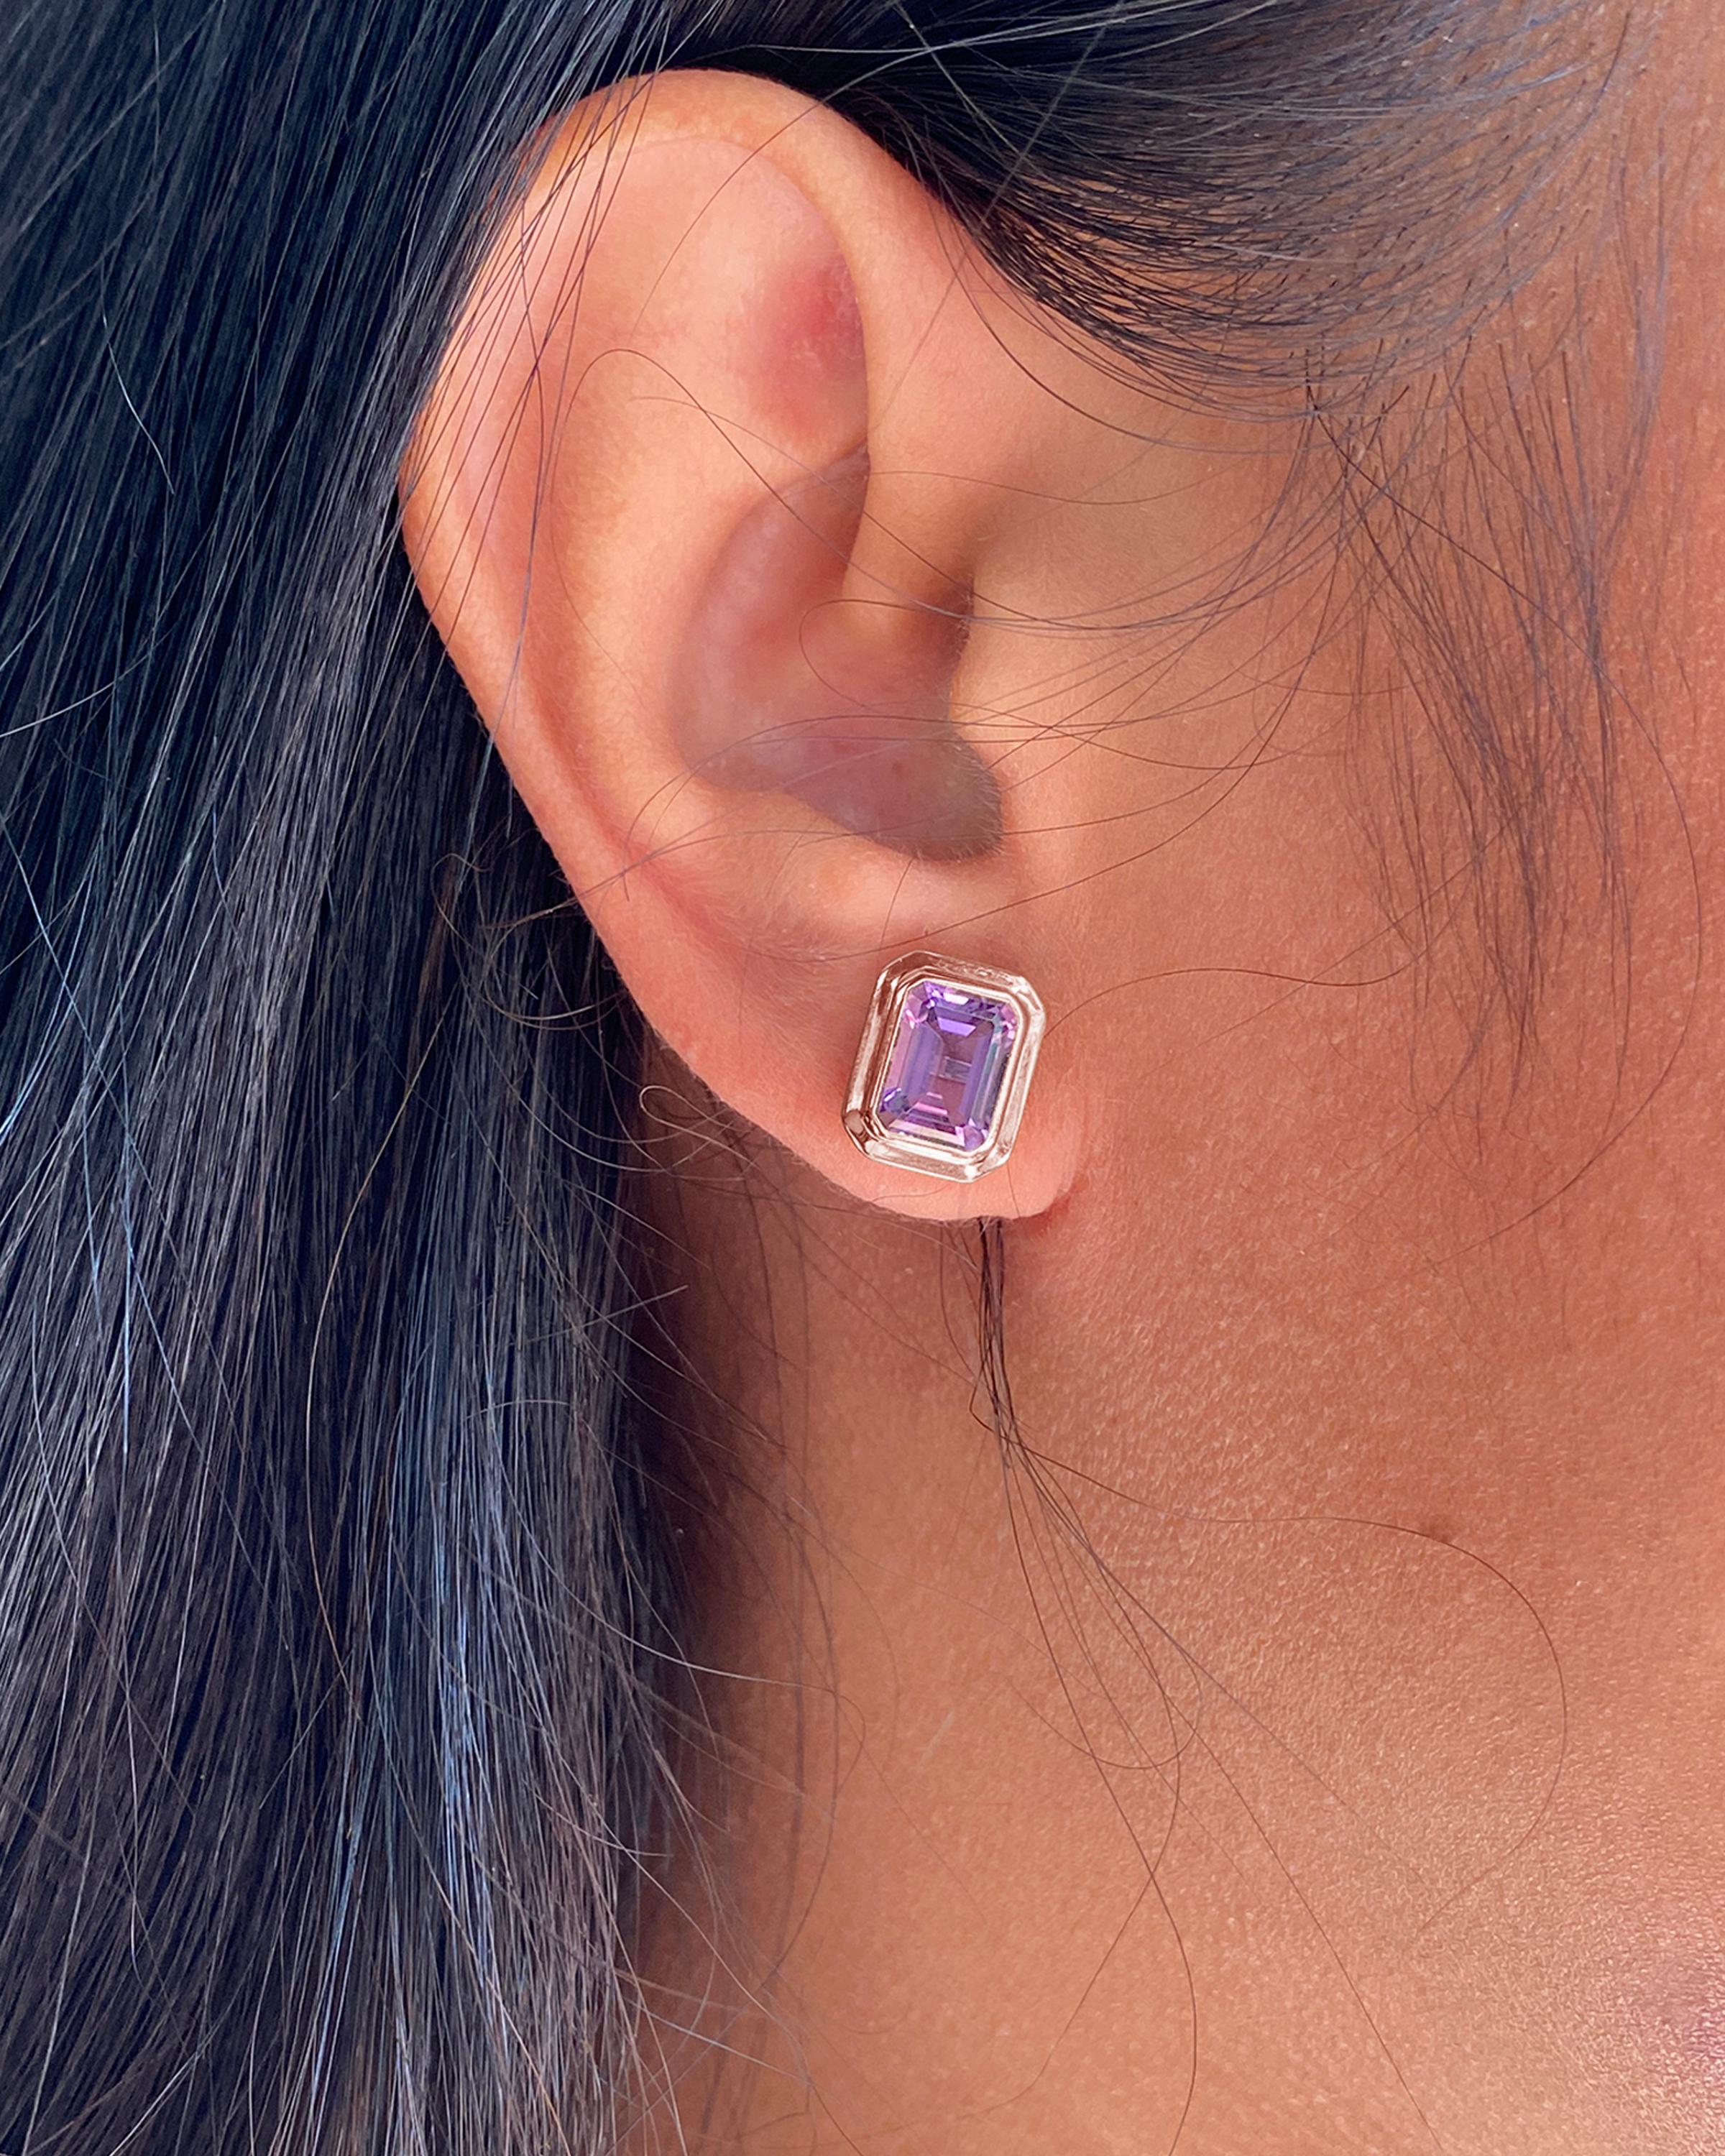 The Lavender Amethyst Emerald Cut Bezel Set Stud Earrings in 18K Rose Gold are exquisite pieces from the 'Manhattan' Collection. These stunning earrings feature a pair of vibrant lavender amethyst gemstones, each expertly cut in an elegant emerald